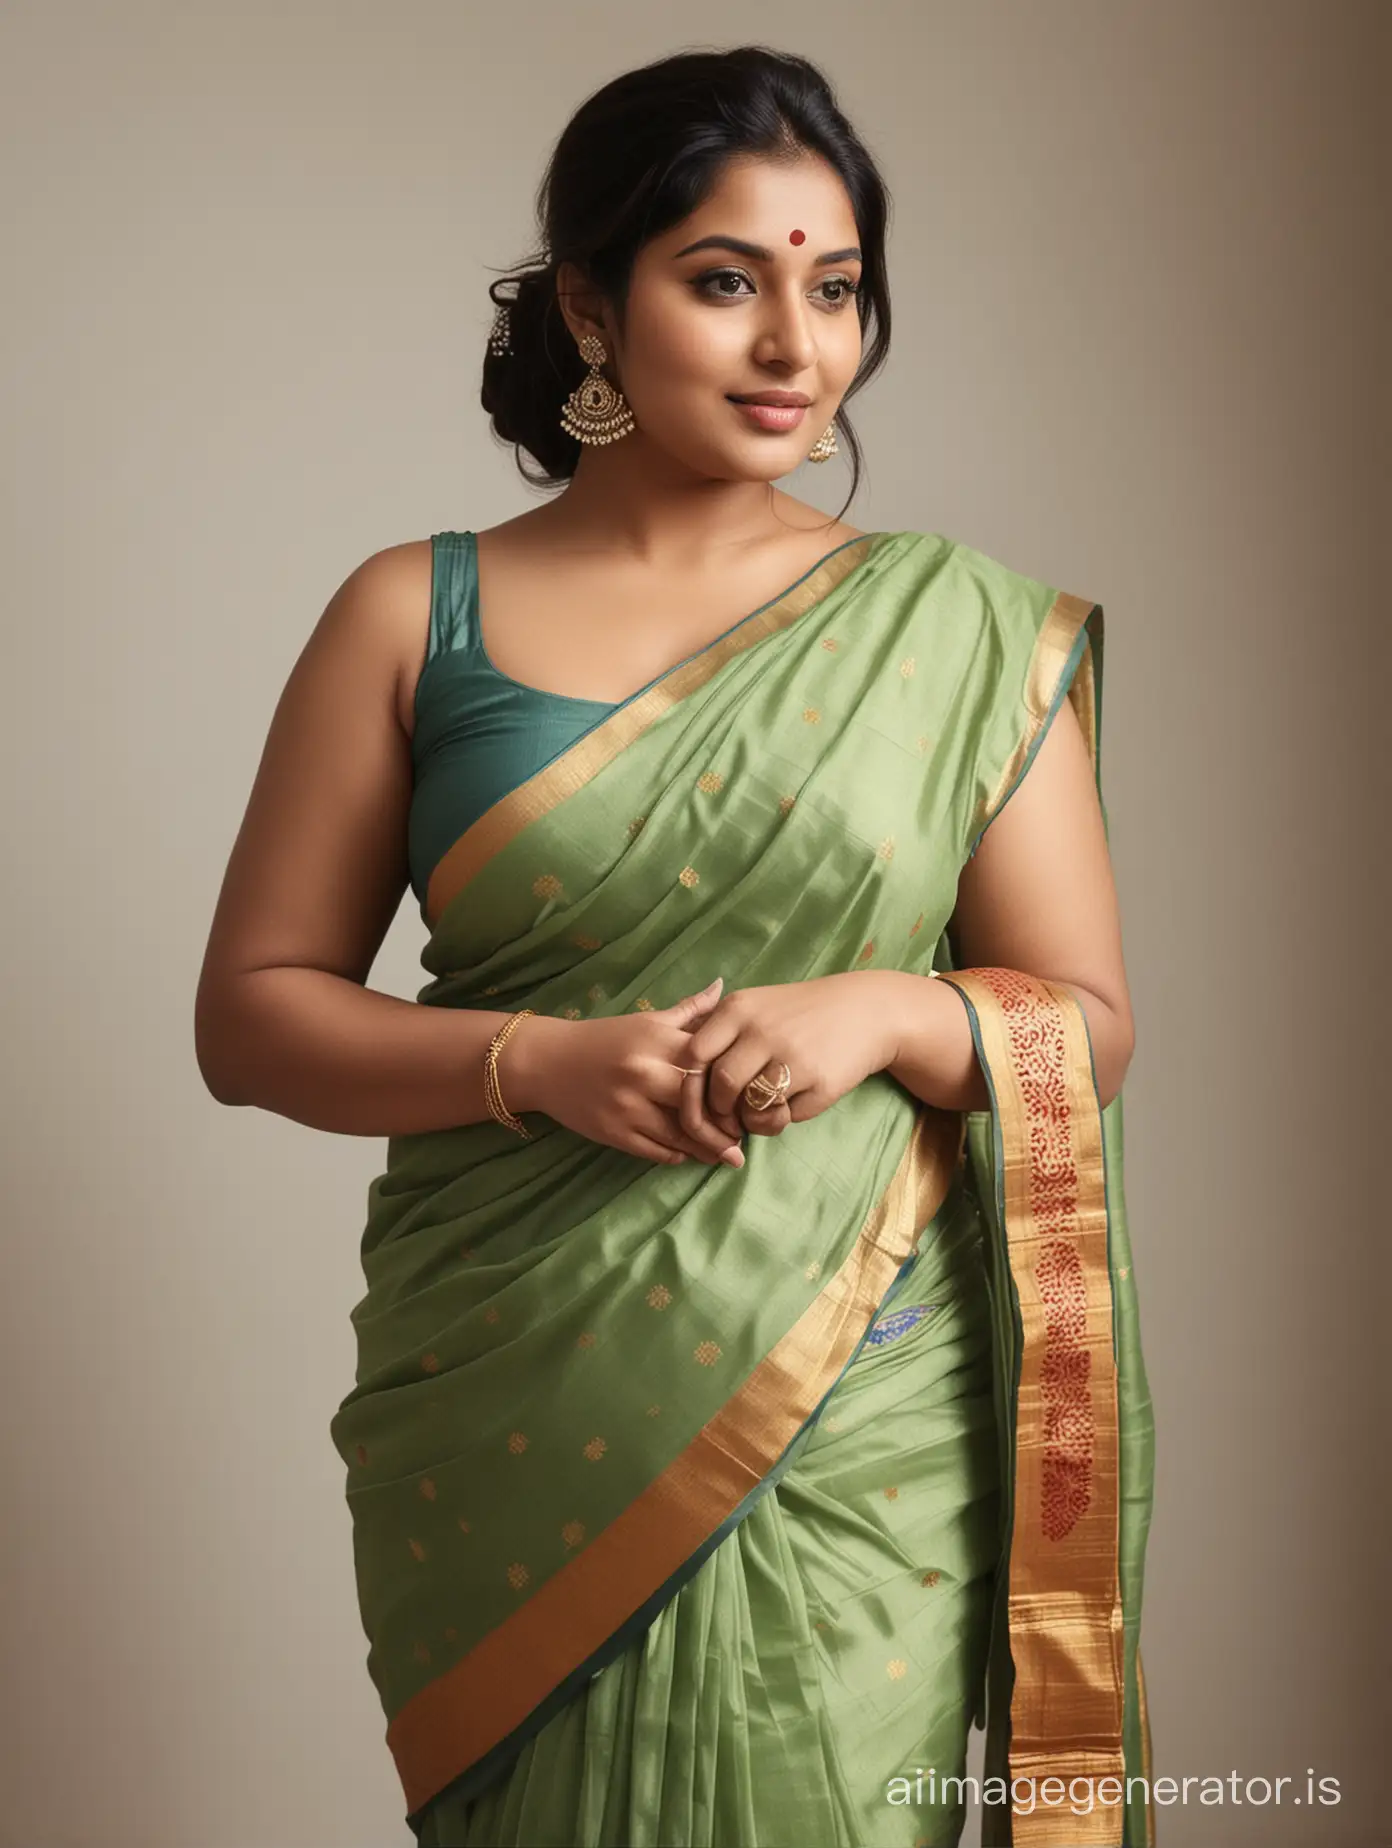 Stylish-Plus-Size-Indian-Woman-in-Sleeveless-Saree-Using-Smartphone-at-Home